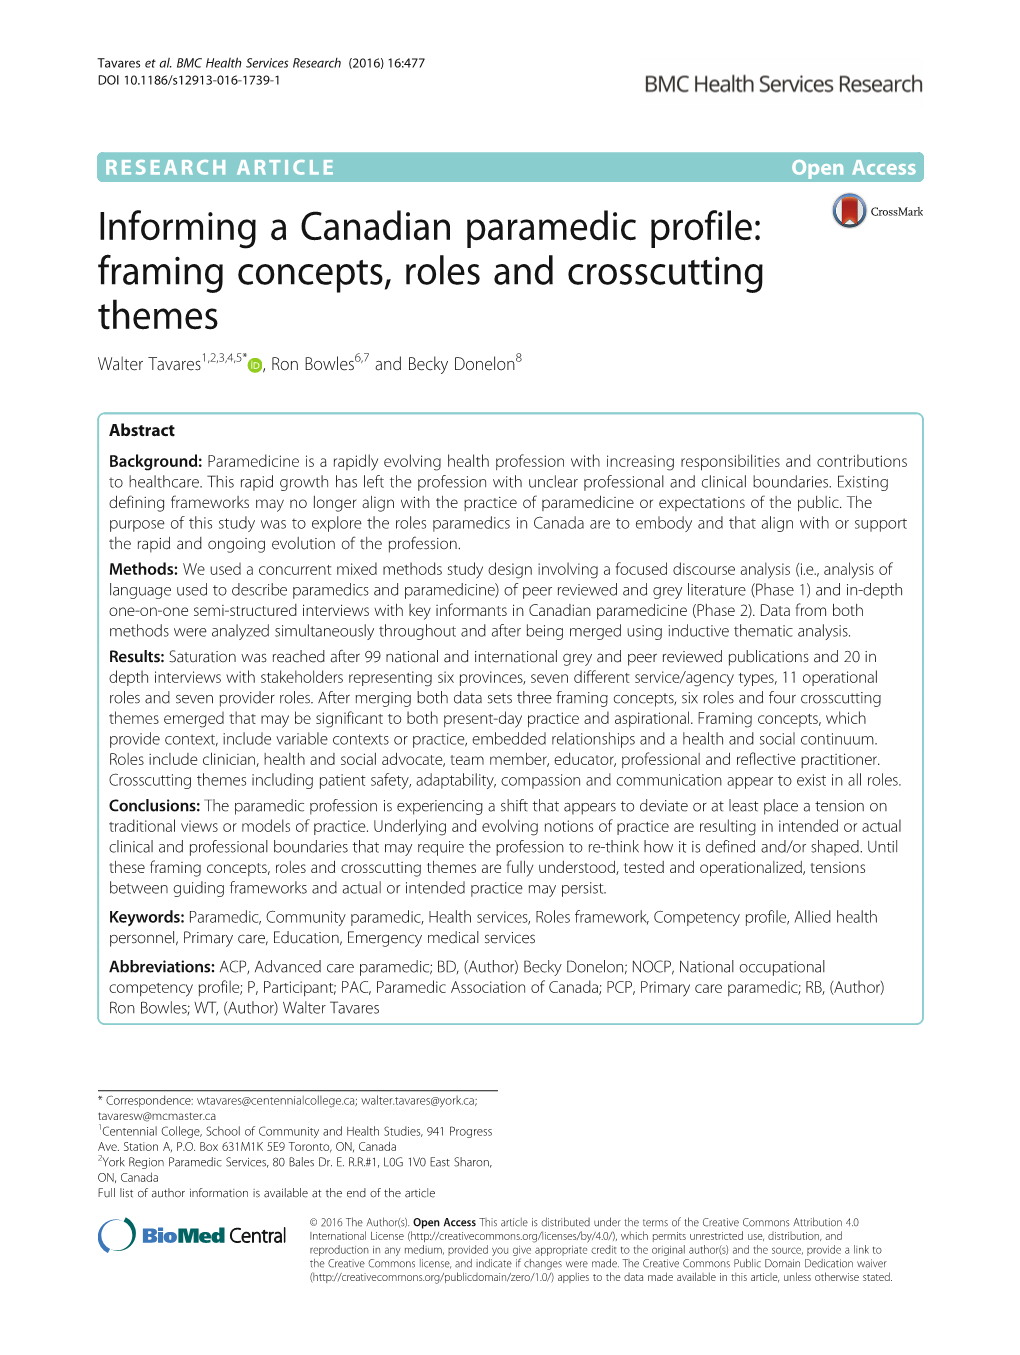 Informing a Canadian Paramedic Profile: Framing Concepts, Roles and Crosscutting Themes Walter Tavares1,2,3,4,5* , Ron Bowles6,7 and Becky Donelon8